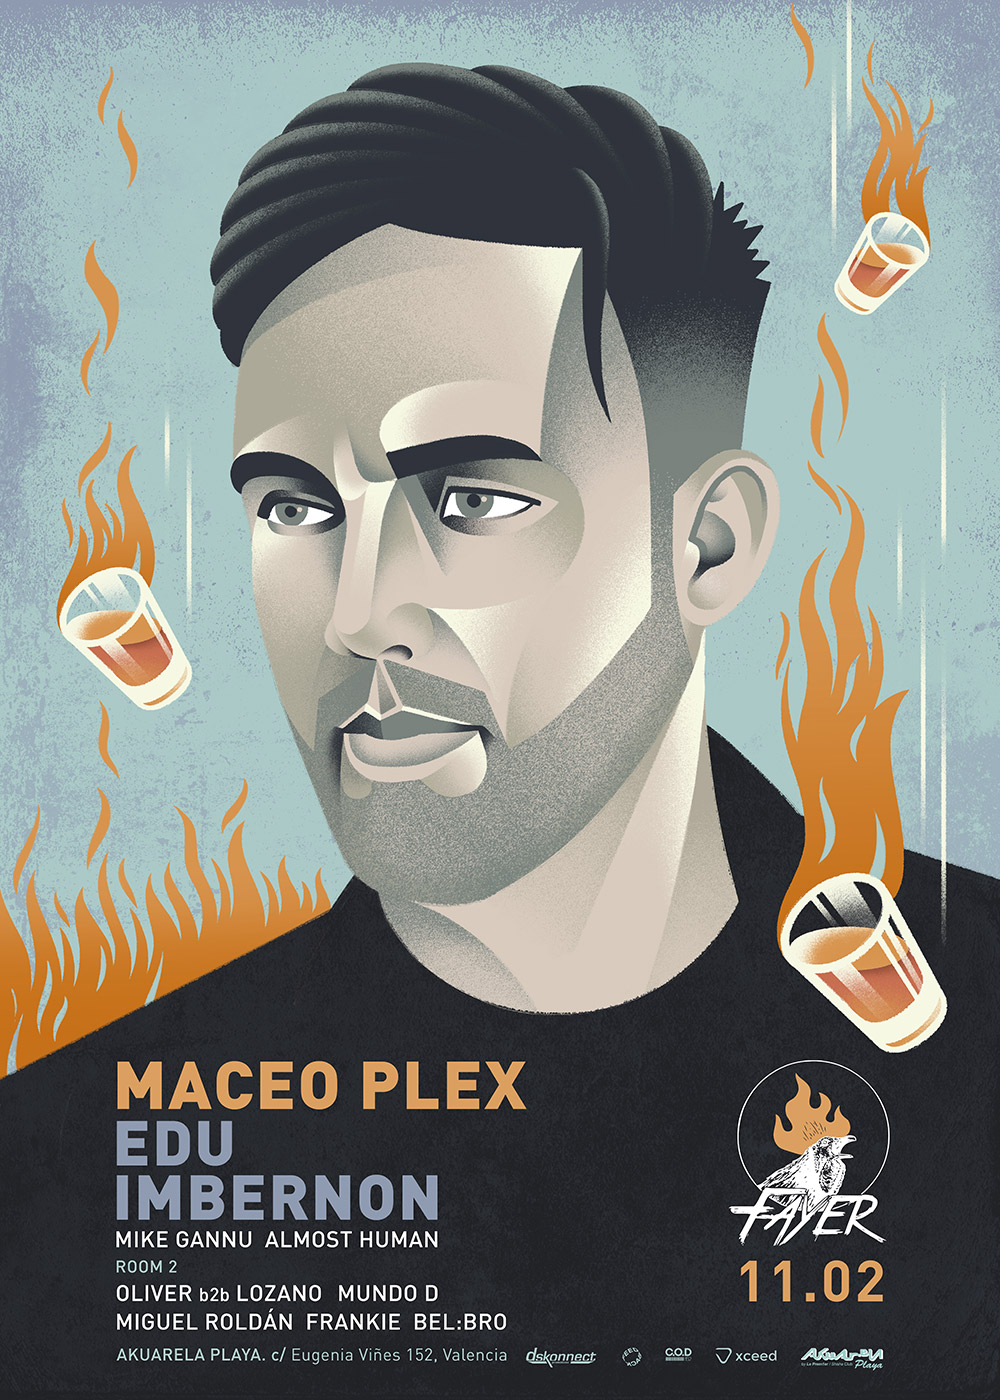 Maceo Plex saturday 11 february 2017 Fayer with Edu Imbernon, Mike Gannu and Almost Human